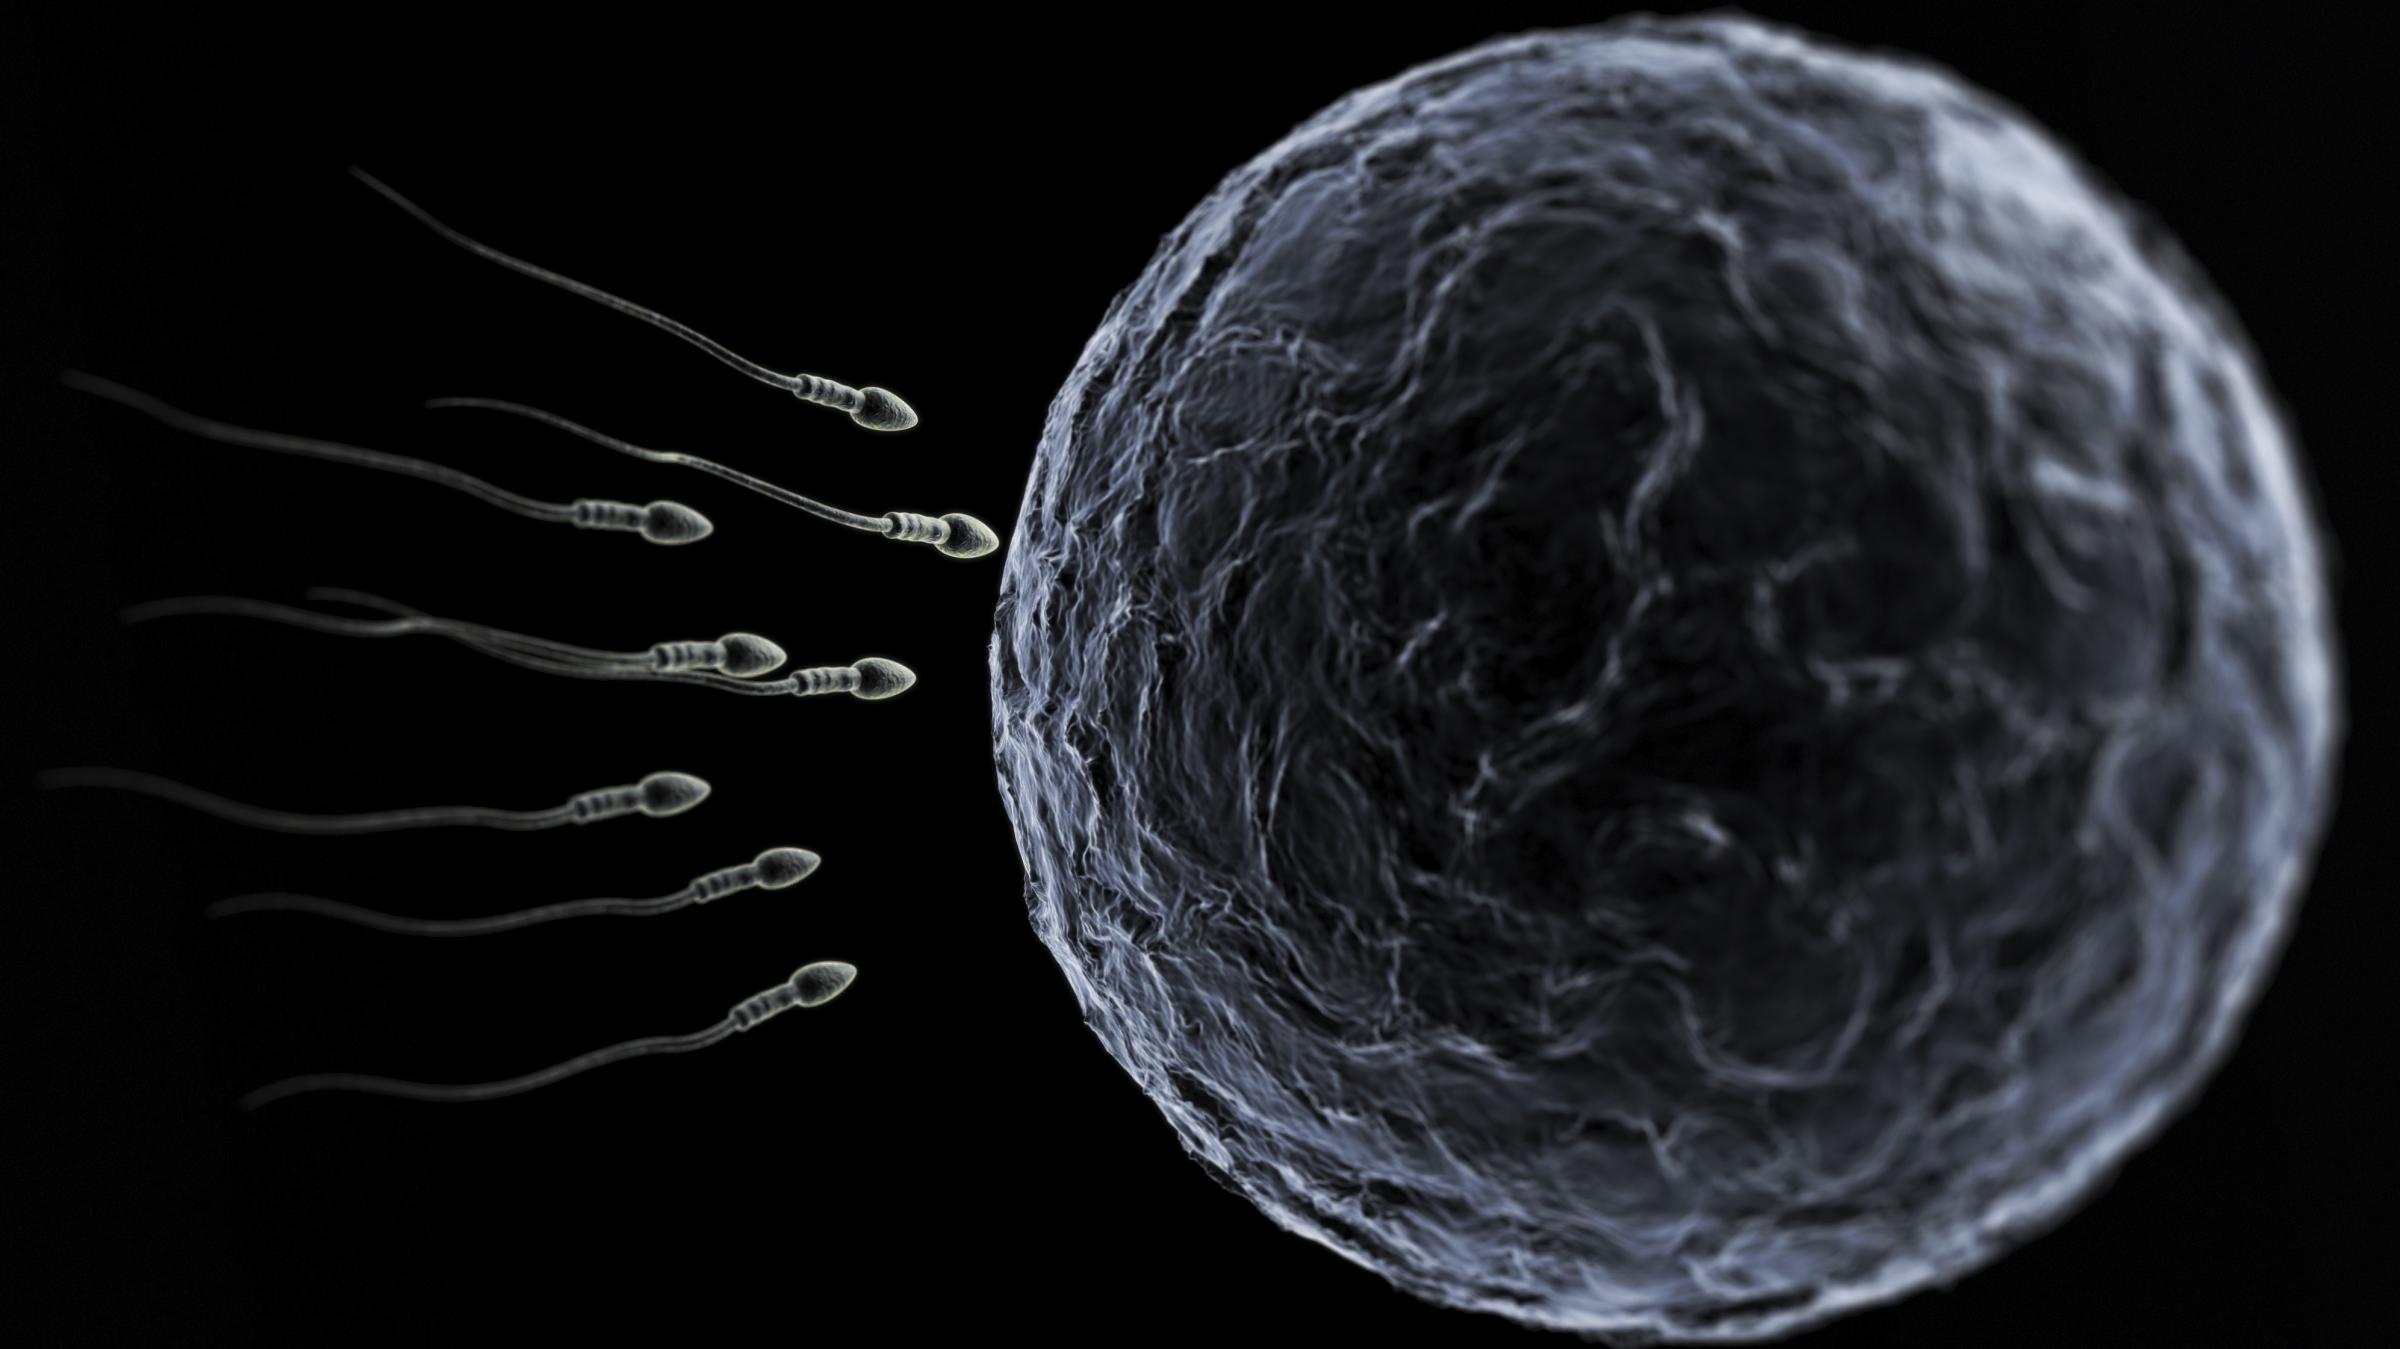 every human sperm and egg is, beyond the shadow of a doubt, alive